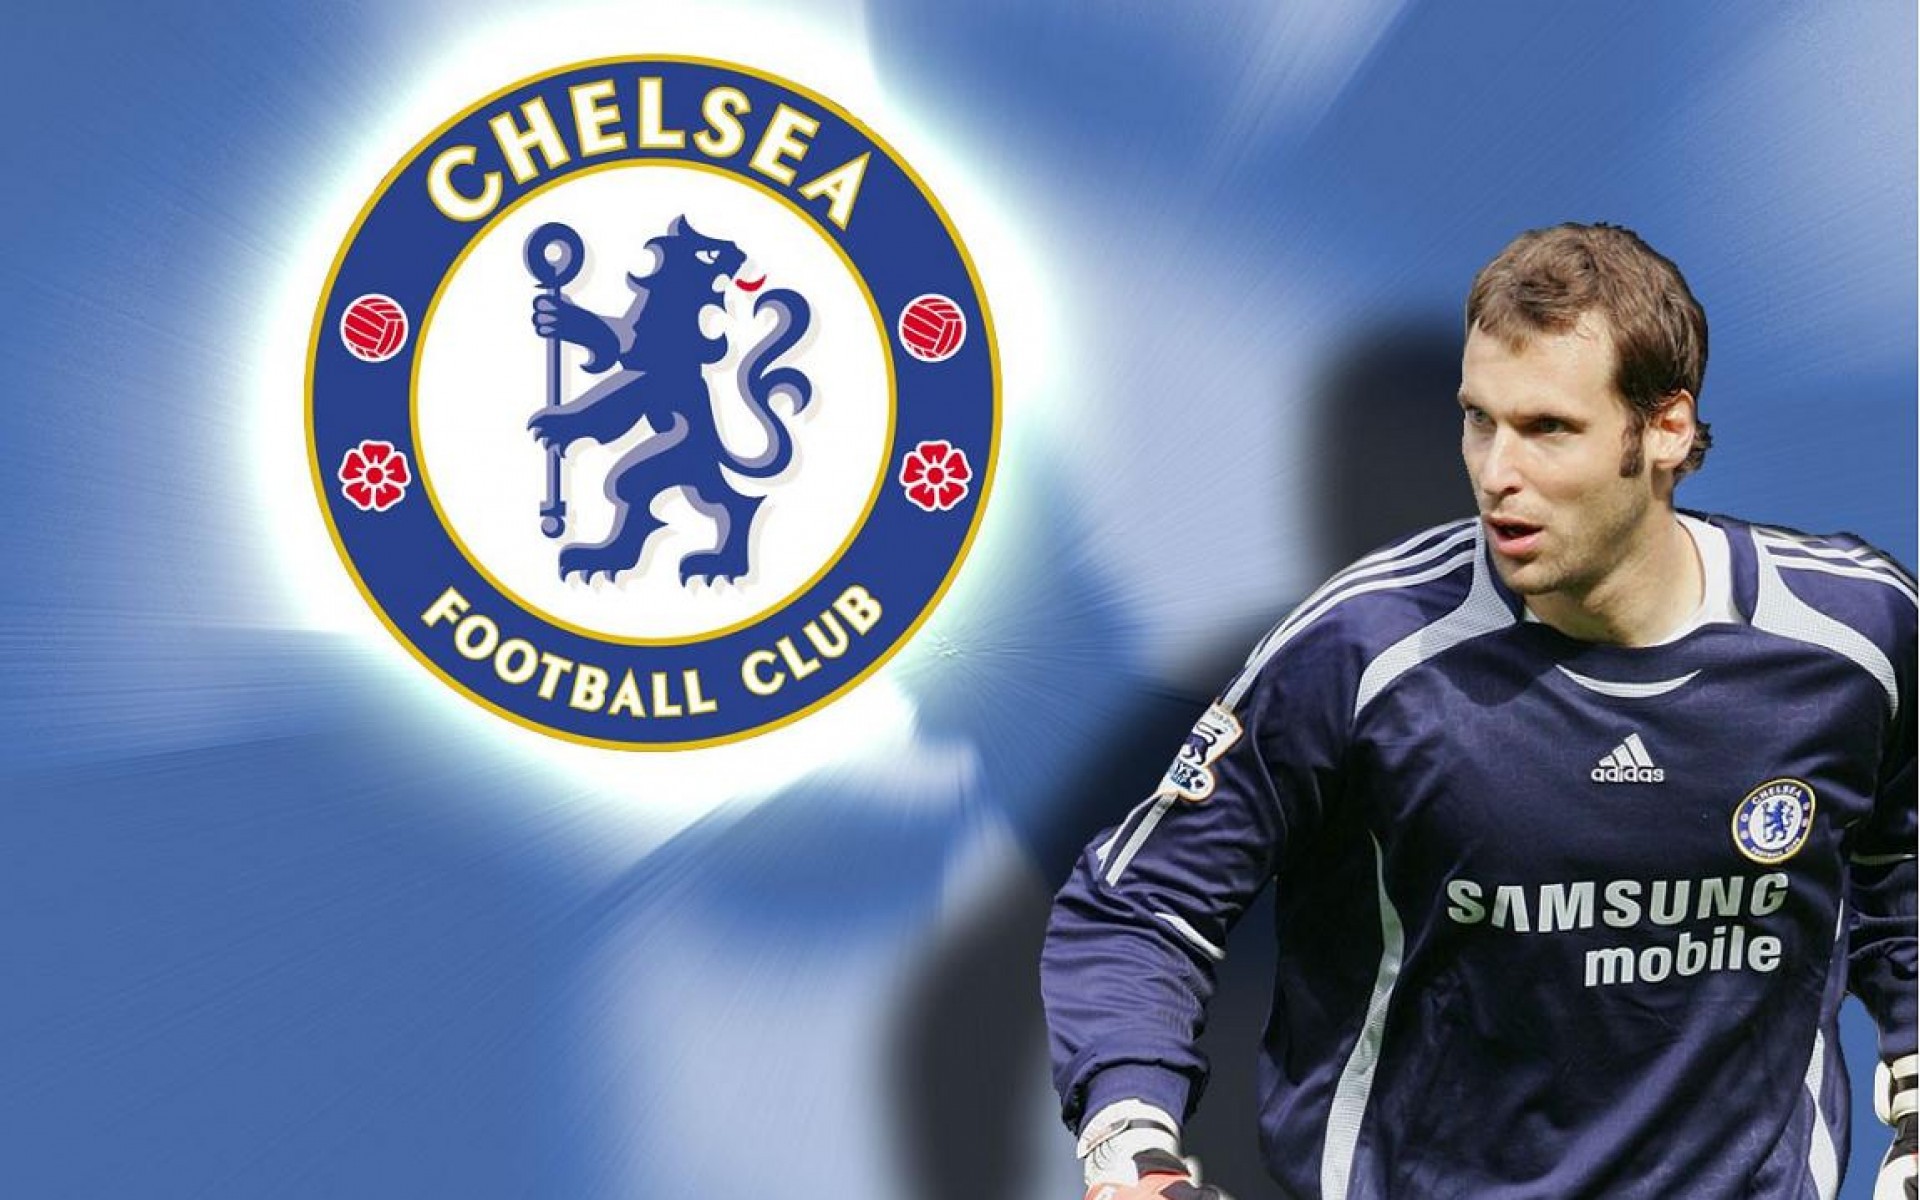 The player Chelsea Petr Cech on blue background wallpapers and images